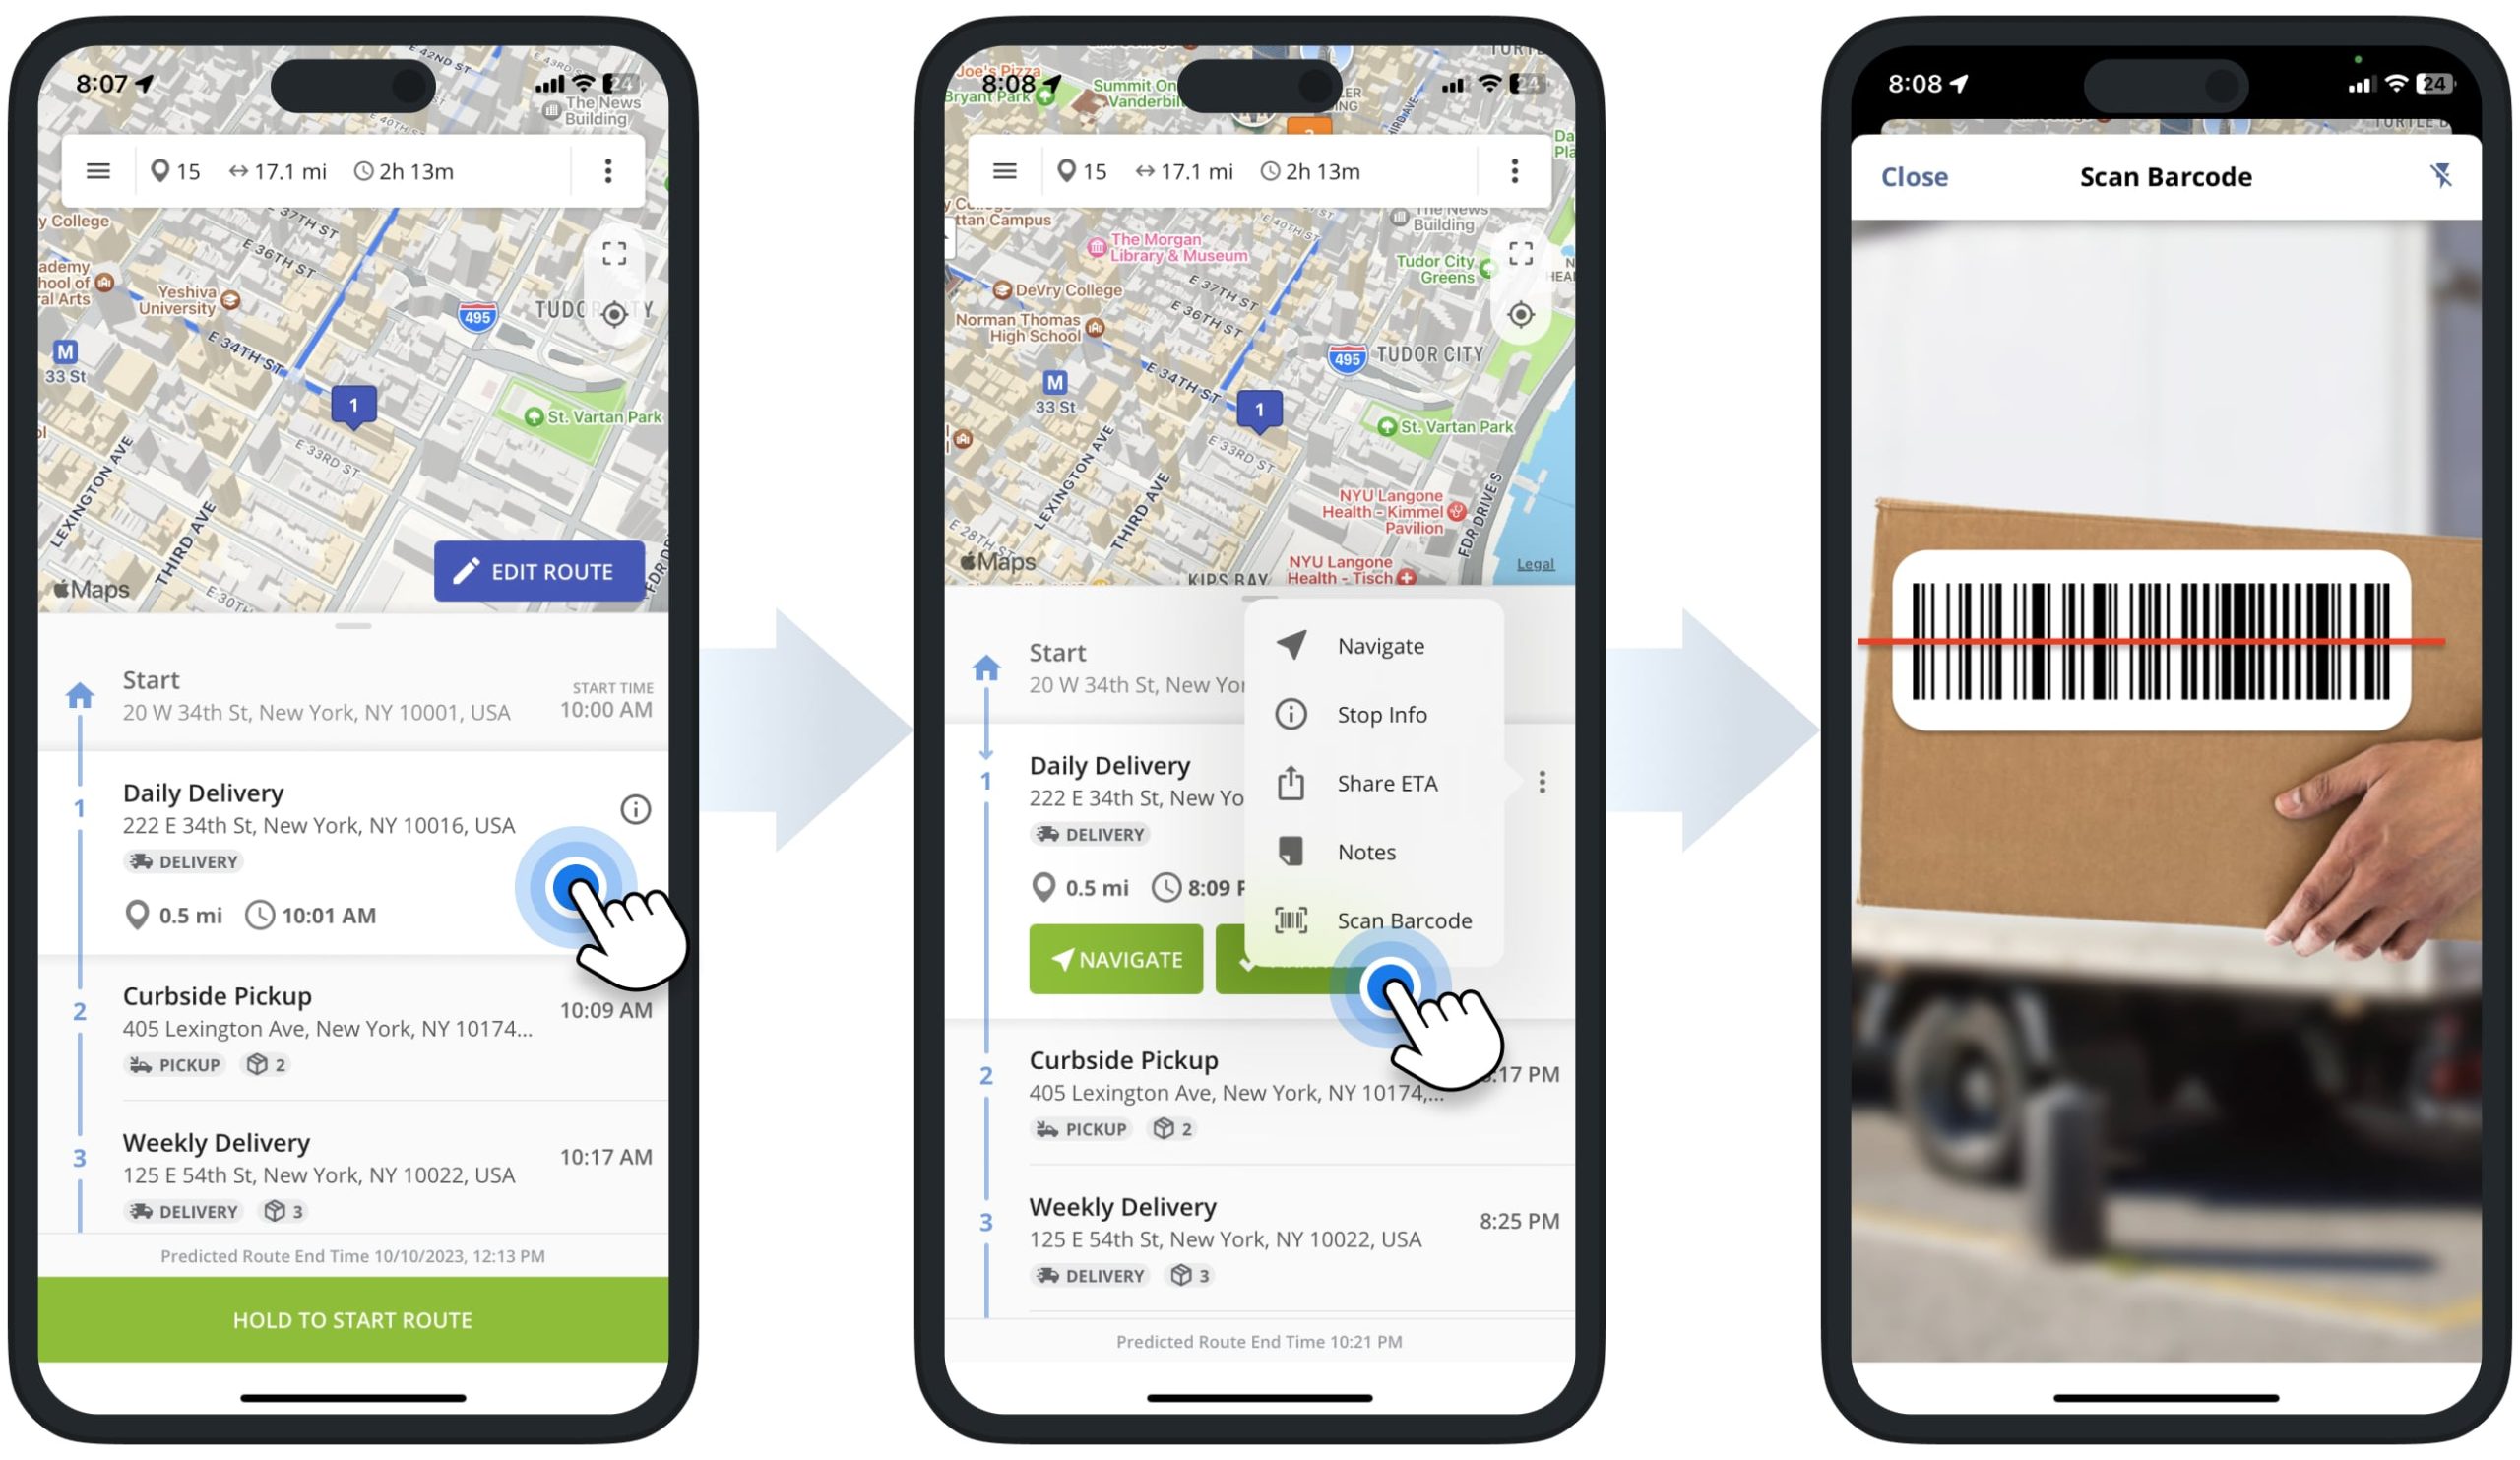 Attach barcode Custom Data to route stops using the in-app barcode scanner on Route4Me's iPhone and iPad iOS Route Planning app for drivers.